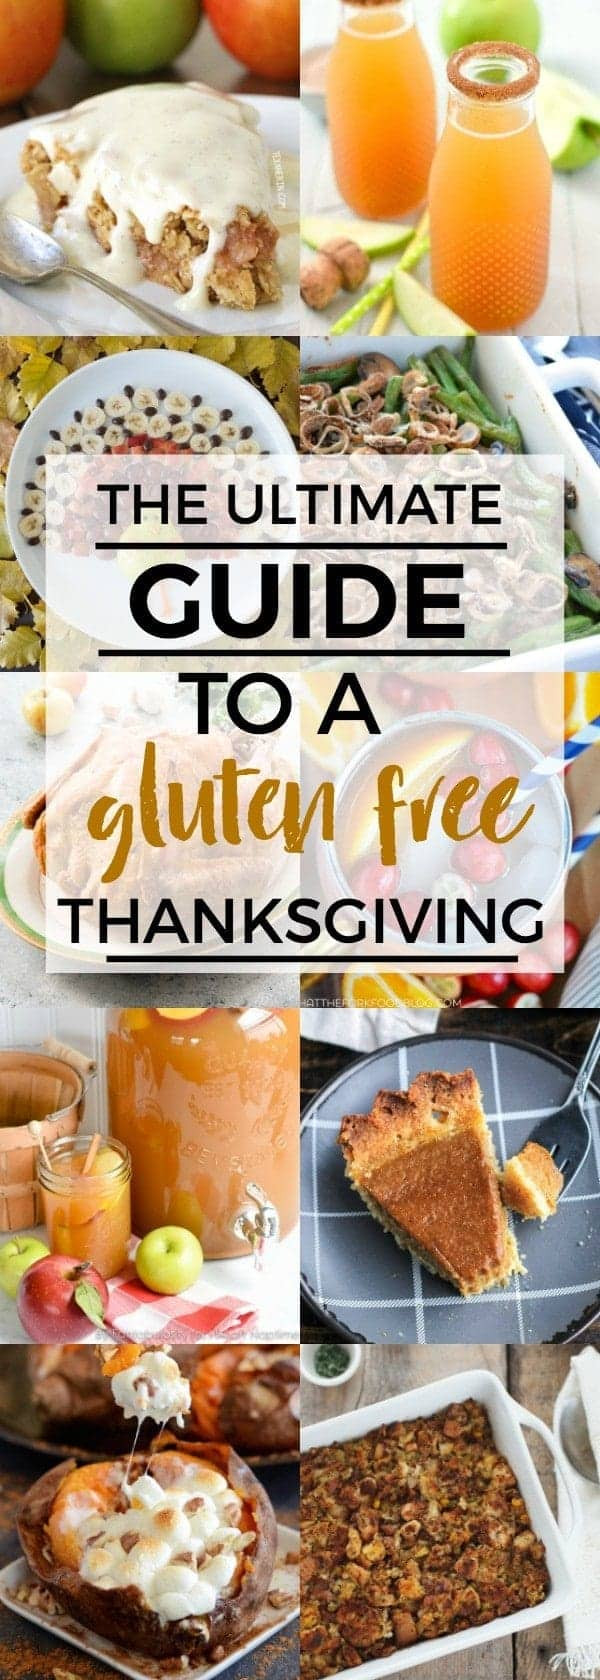 Gluten Free Thanksgiving Menu
 An Easy Guide to a Gluten Free Thanksgiving Menu What